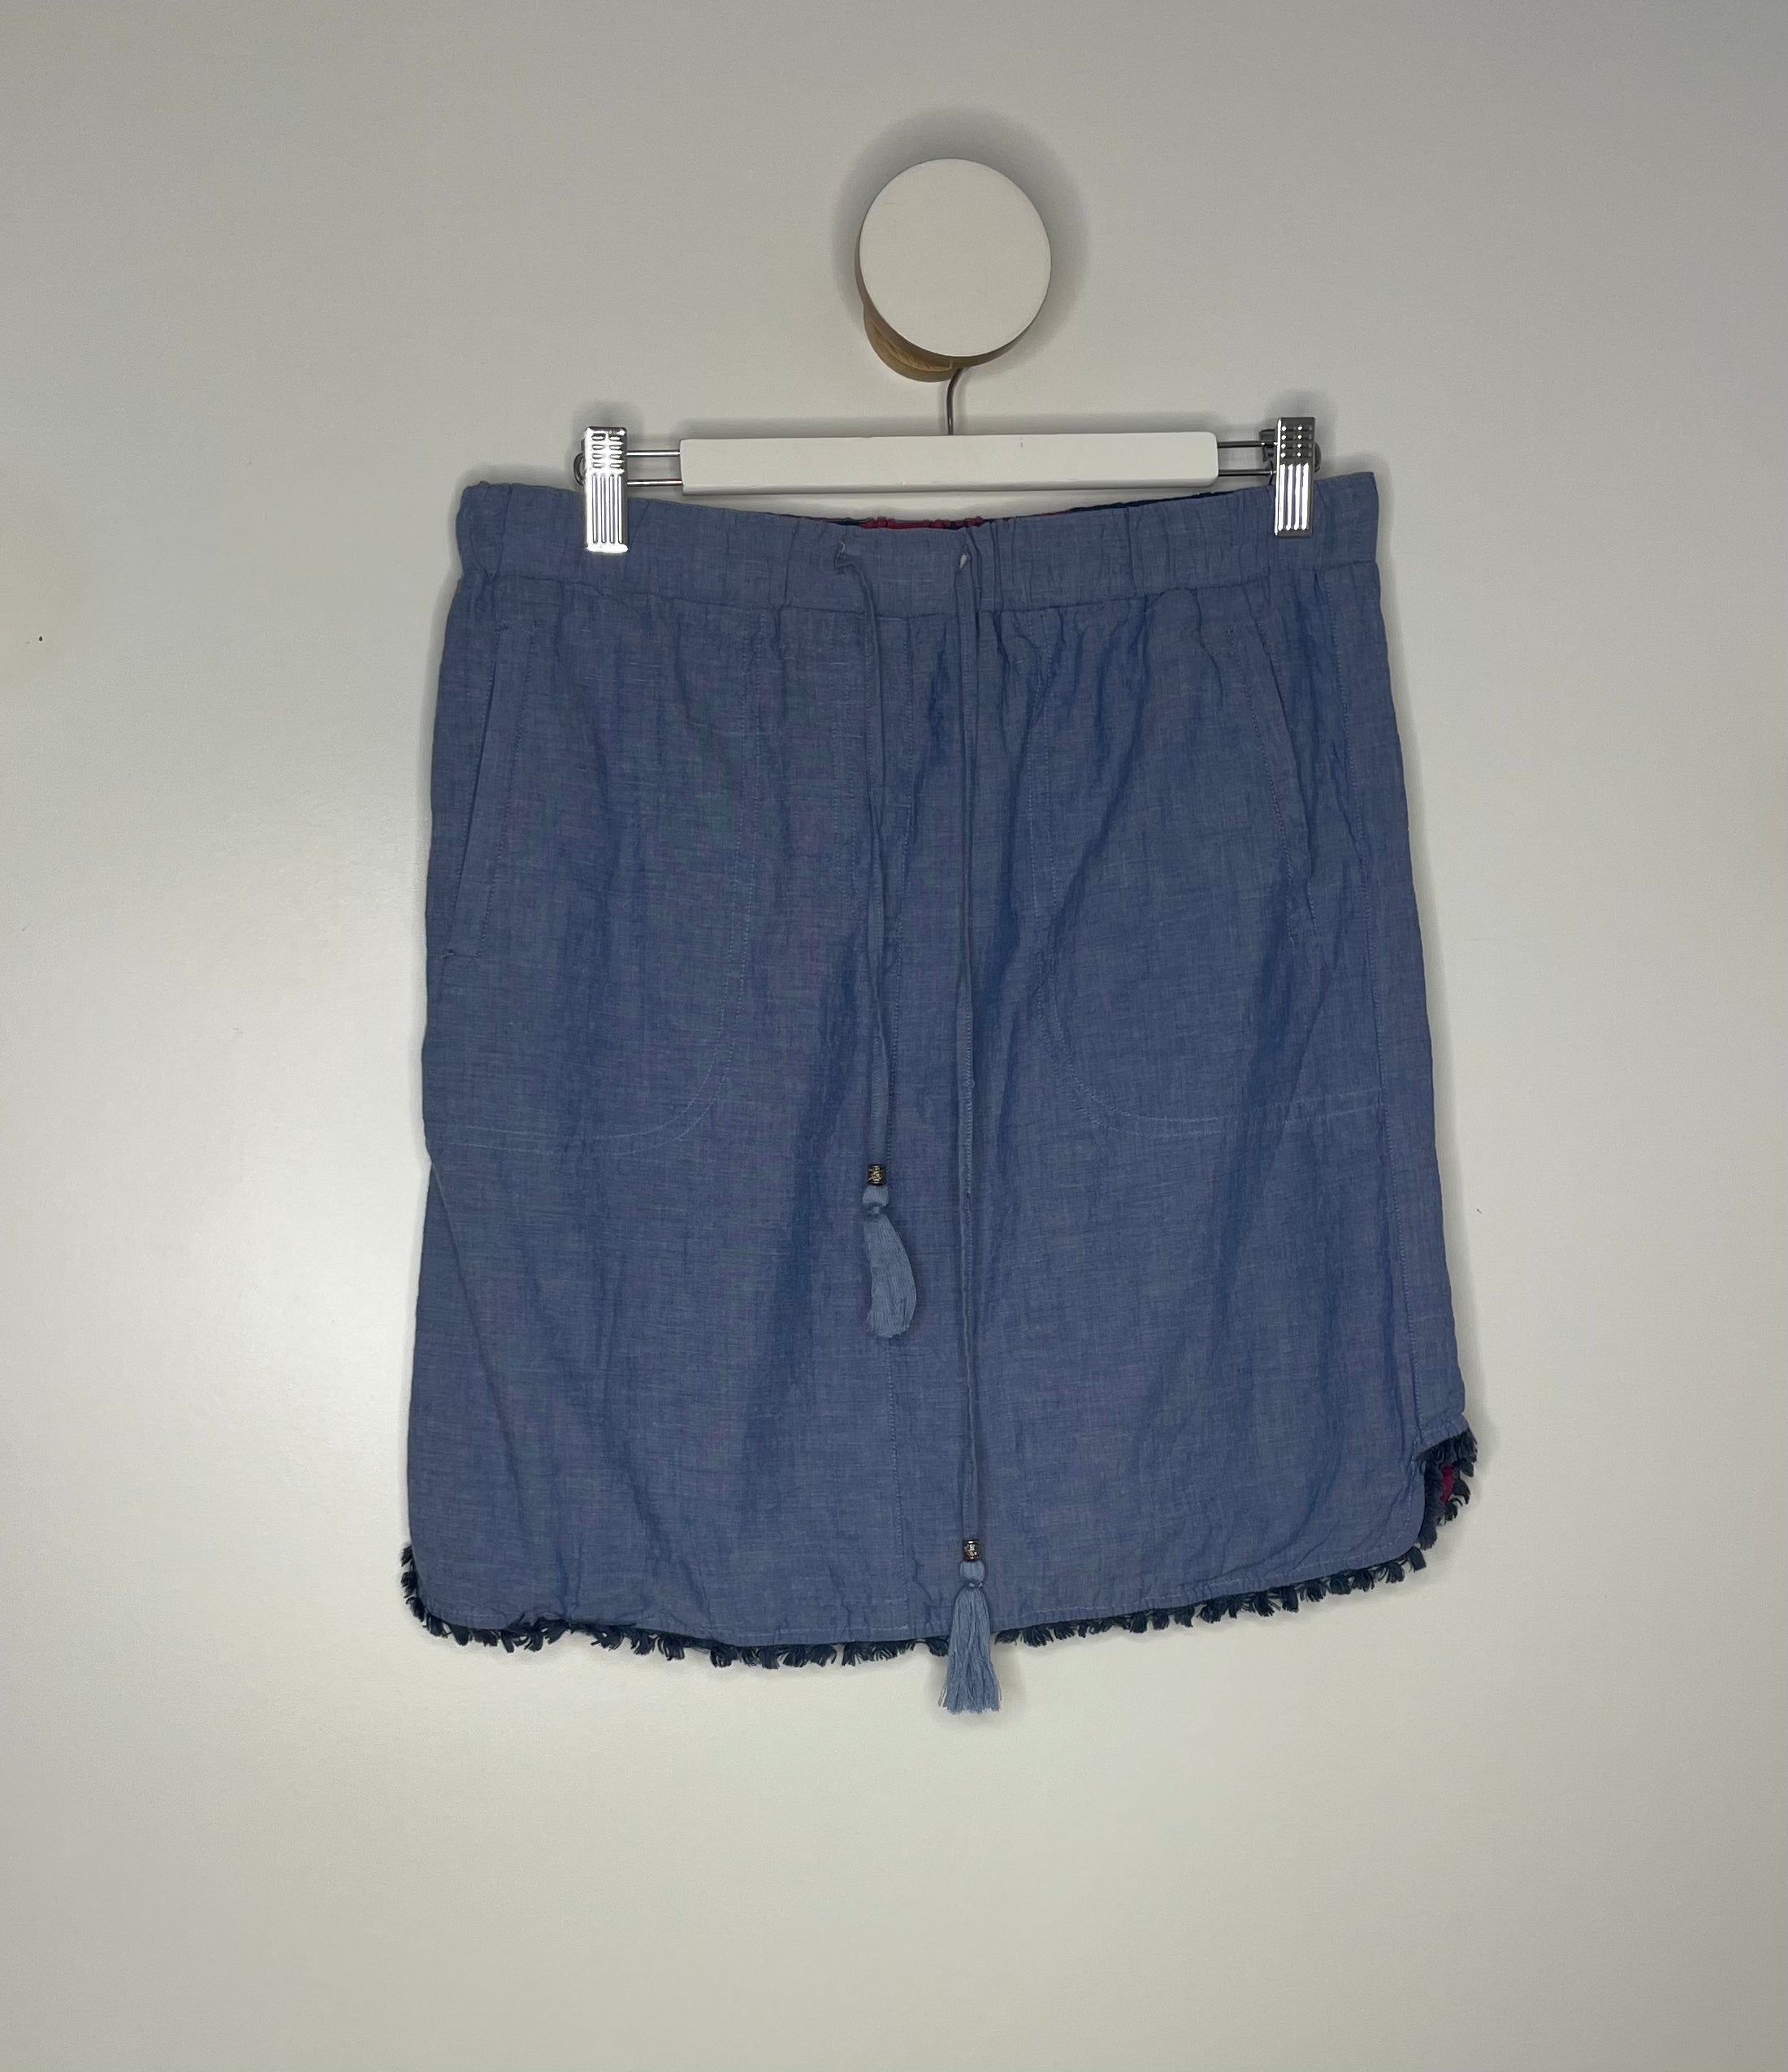 Double Sided Skirt in Denim and White Embroidery